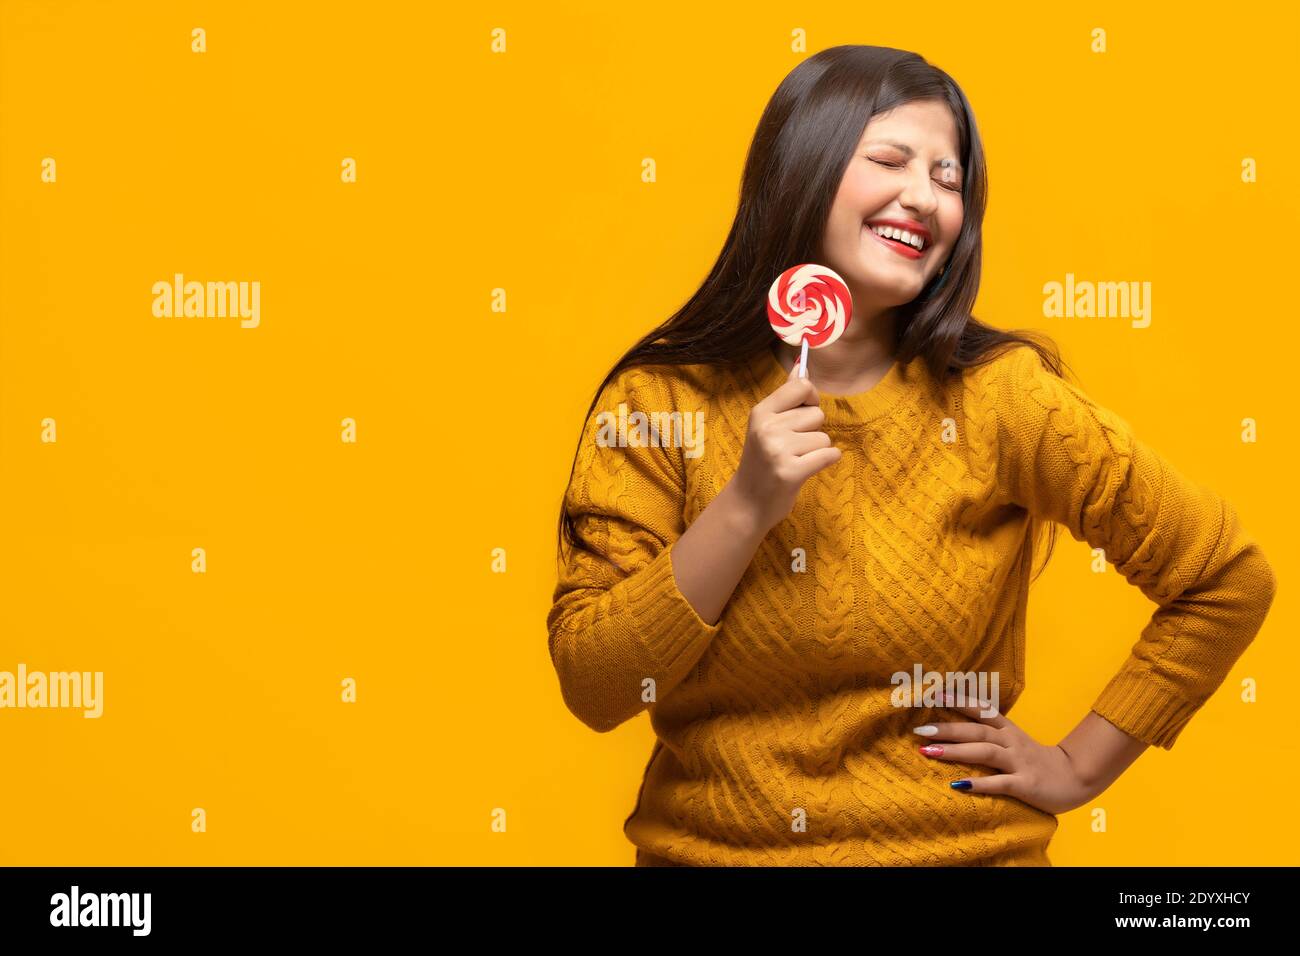 Young woman laughing holding a lollipop in hand Stock Photo